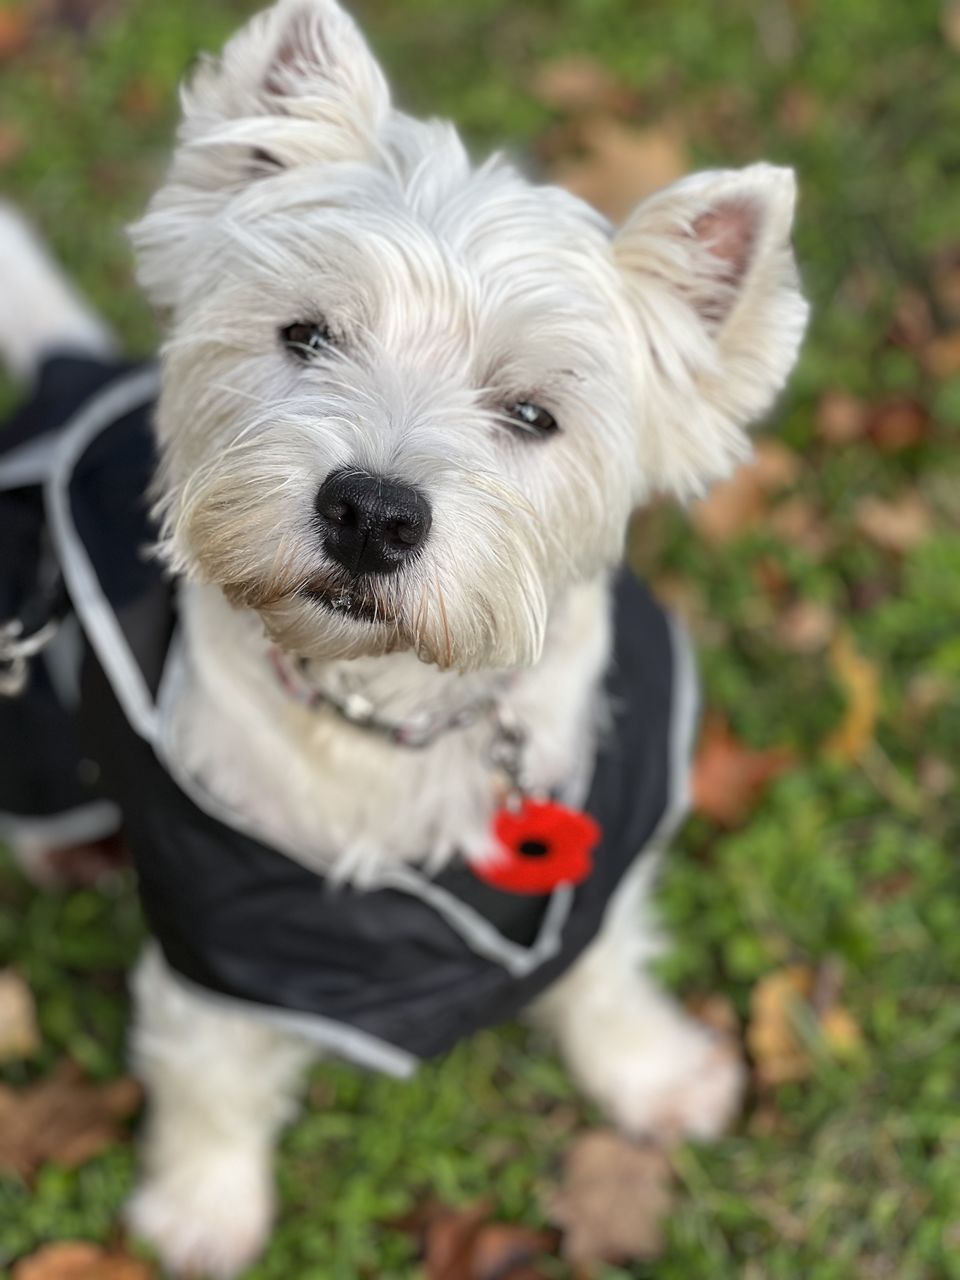 dog, canine, domestic animals, pet, one animal, mammal, animal themes, animal, west highland white terrier, terrier, portrait, looking at camera, cute, white, carnivore, grass, young animal, plant, focus on foreground, nature, no people, lap dog, puppy, day, outdoors, animal hair